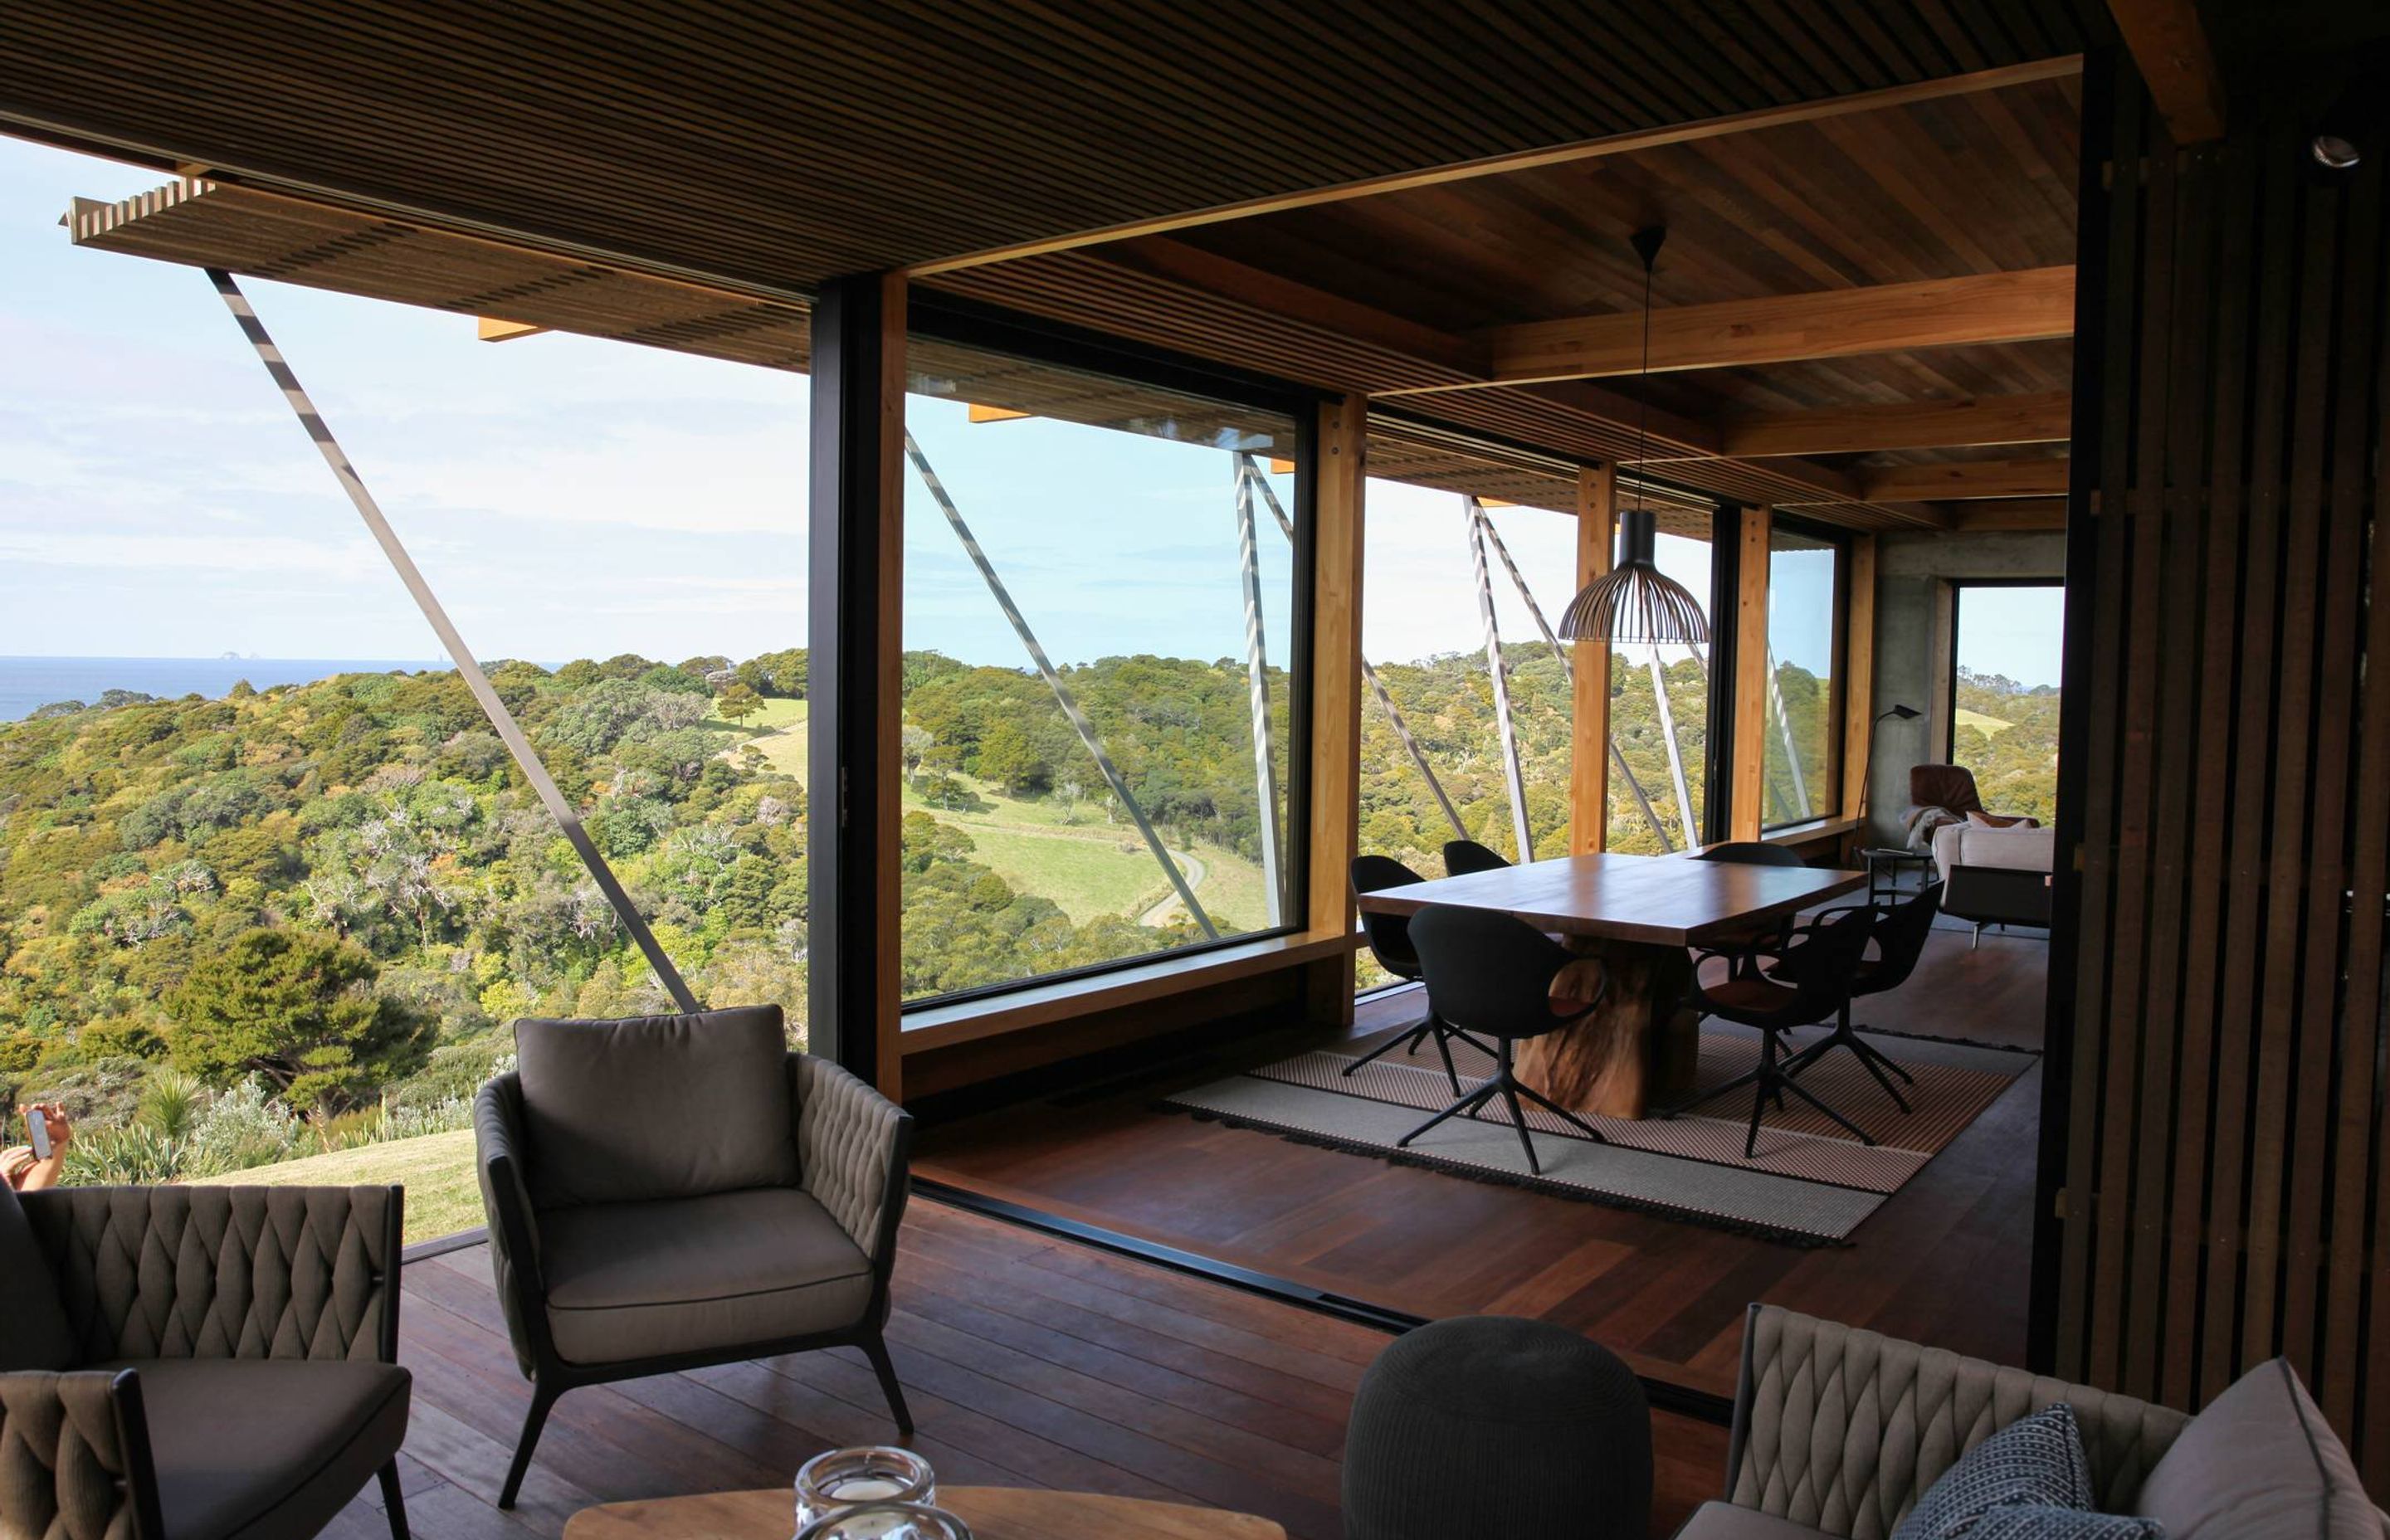 A room with a view to die for – overlooking the treetops and the ocean to Poor Knights Islands. Photograph by Jackie Meiring.